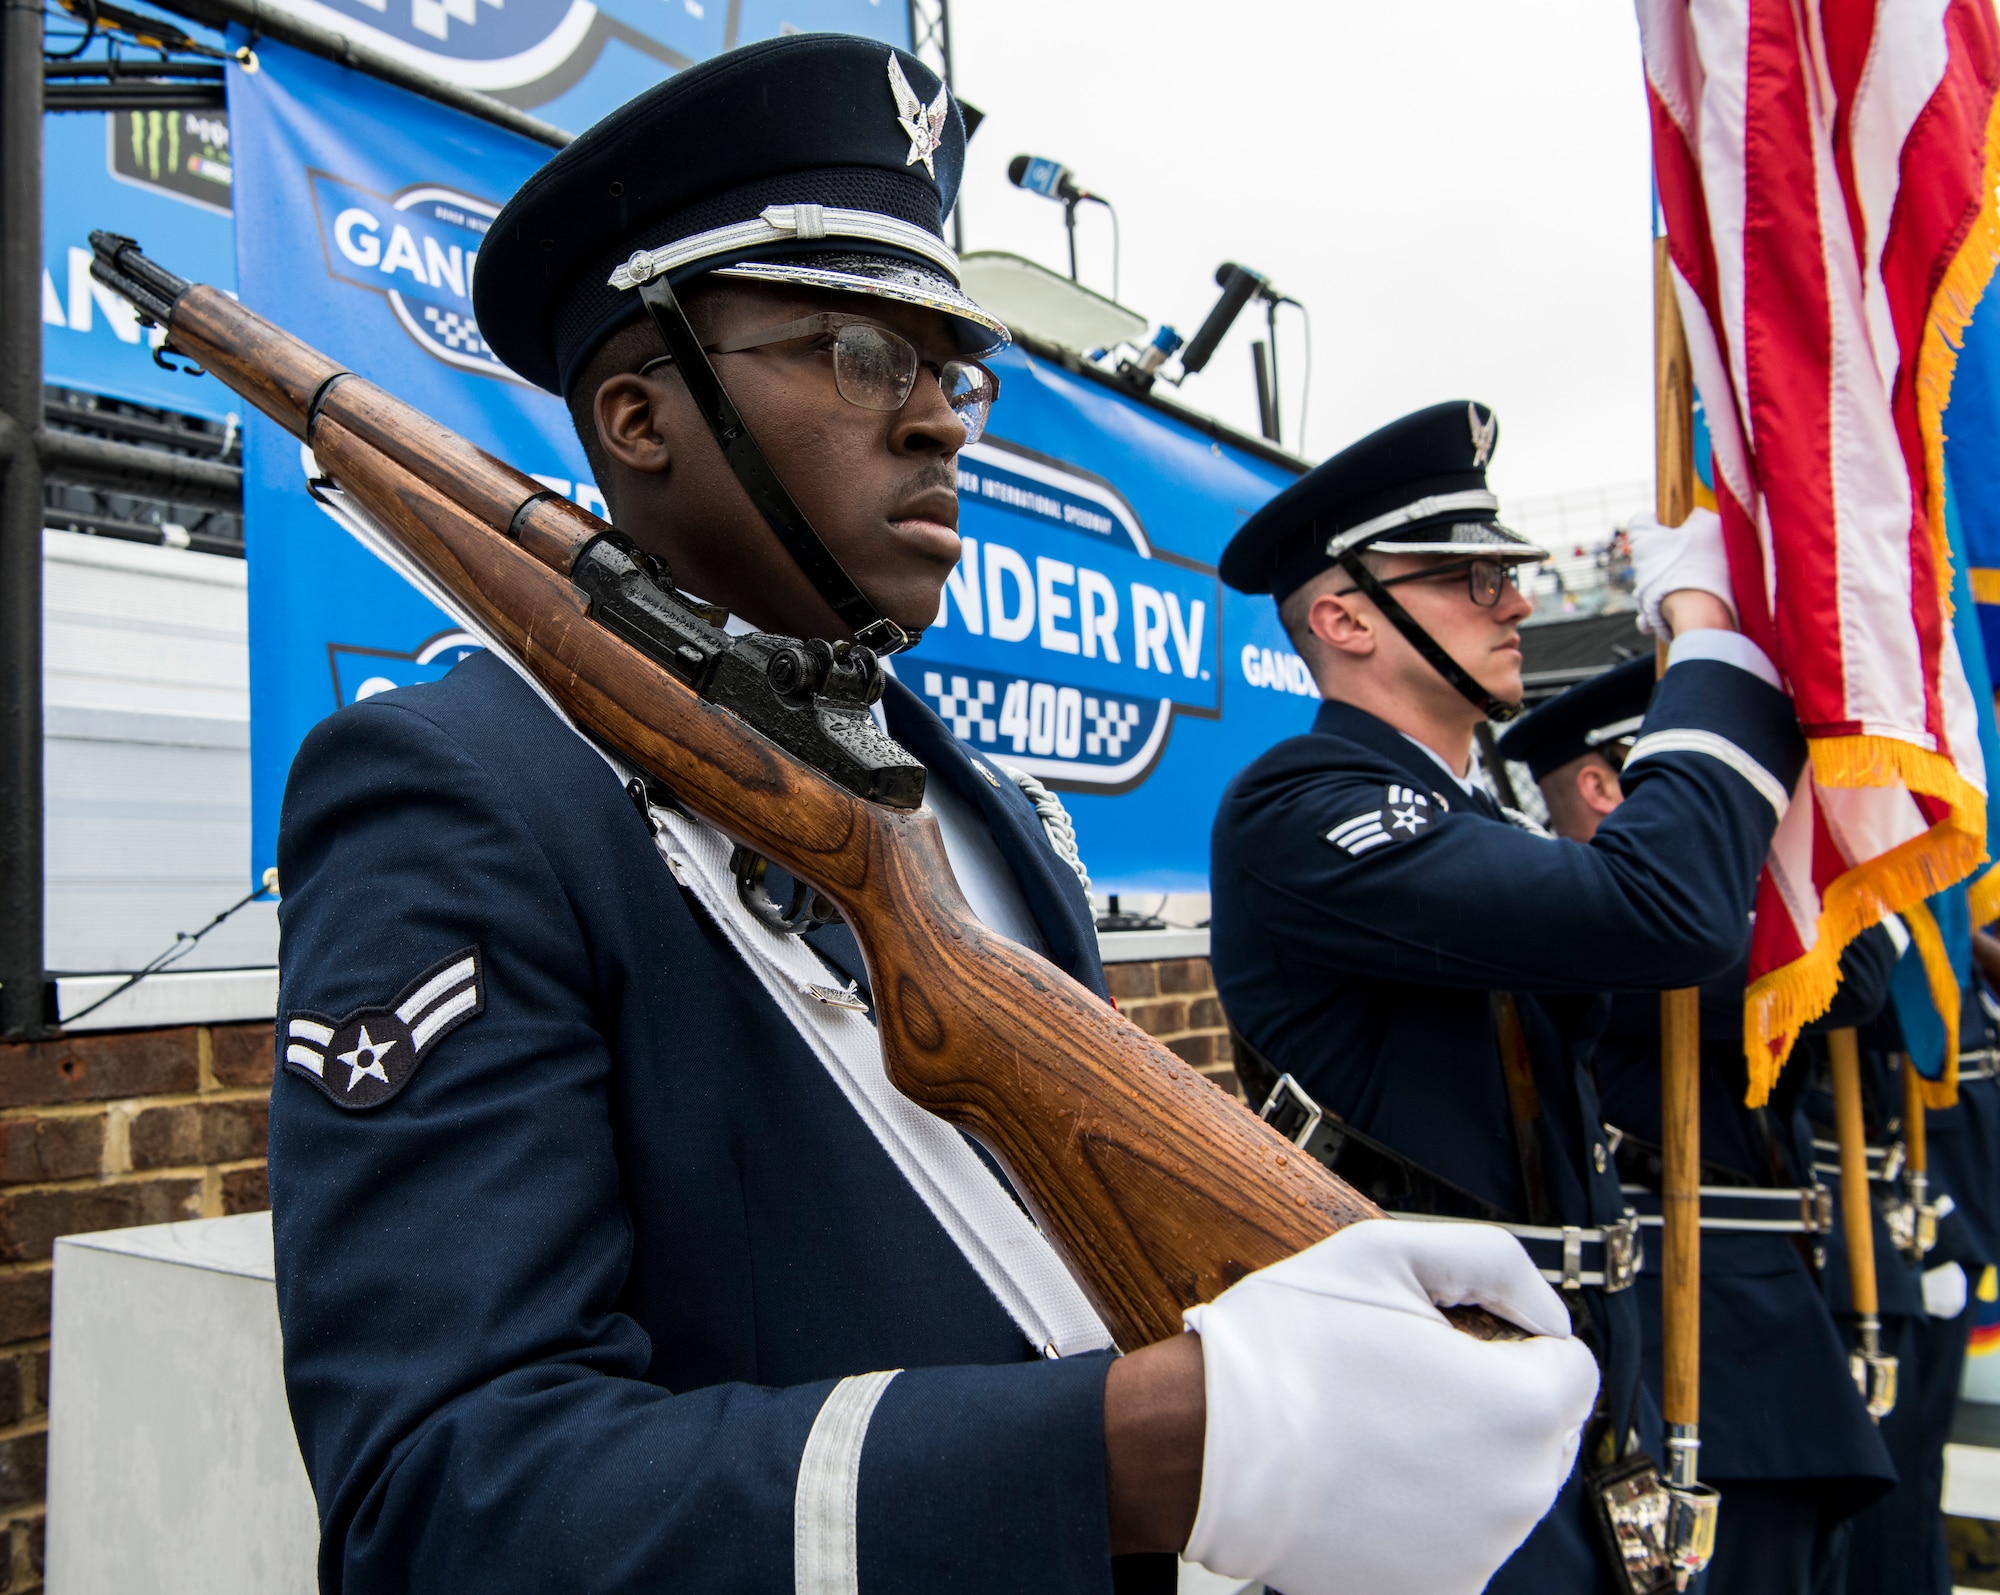 The Dover Air Force Base Honor Guard presents colors during the opening ceremony for the Gander RV 400 Monster Energy NASCAR Cup Series race May. 5, 2019, at the Dover International Speedway in Dover, Del. The Honor Guard also presented colors during the opening ceremony on May 4, 2019. (U.S. Air Force photo by Senior Airman Christopher Quail)